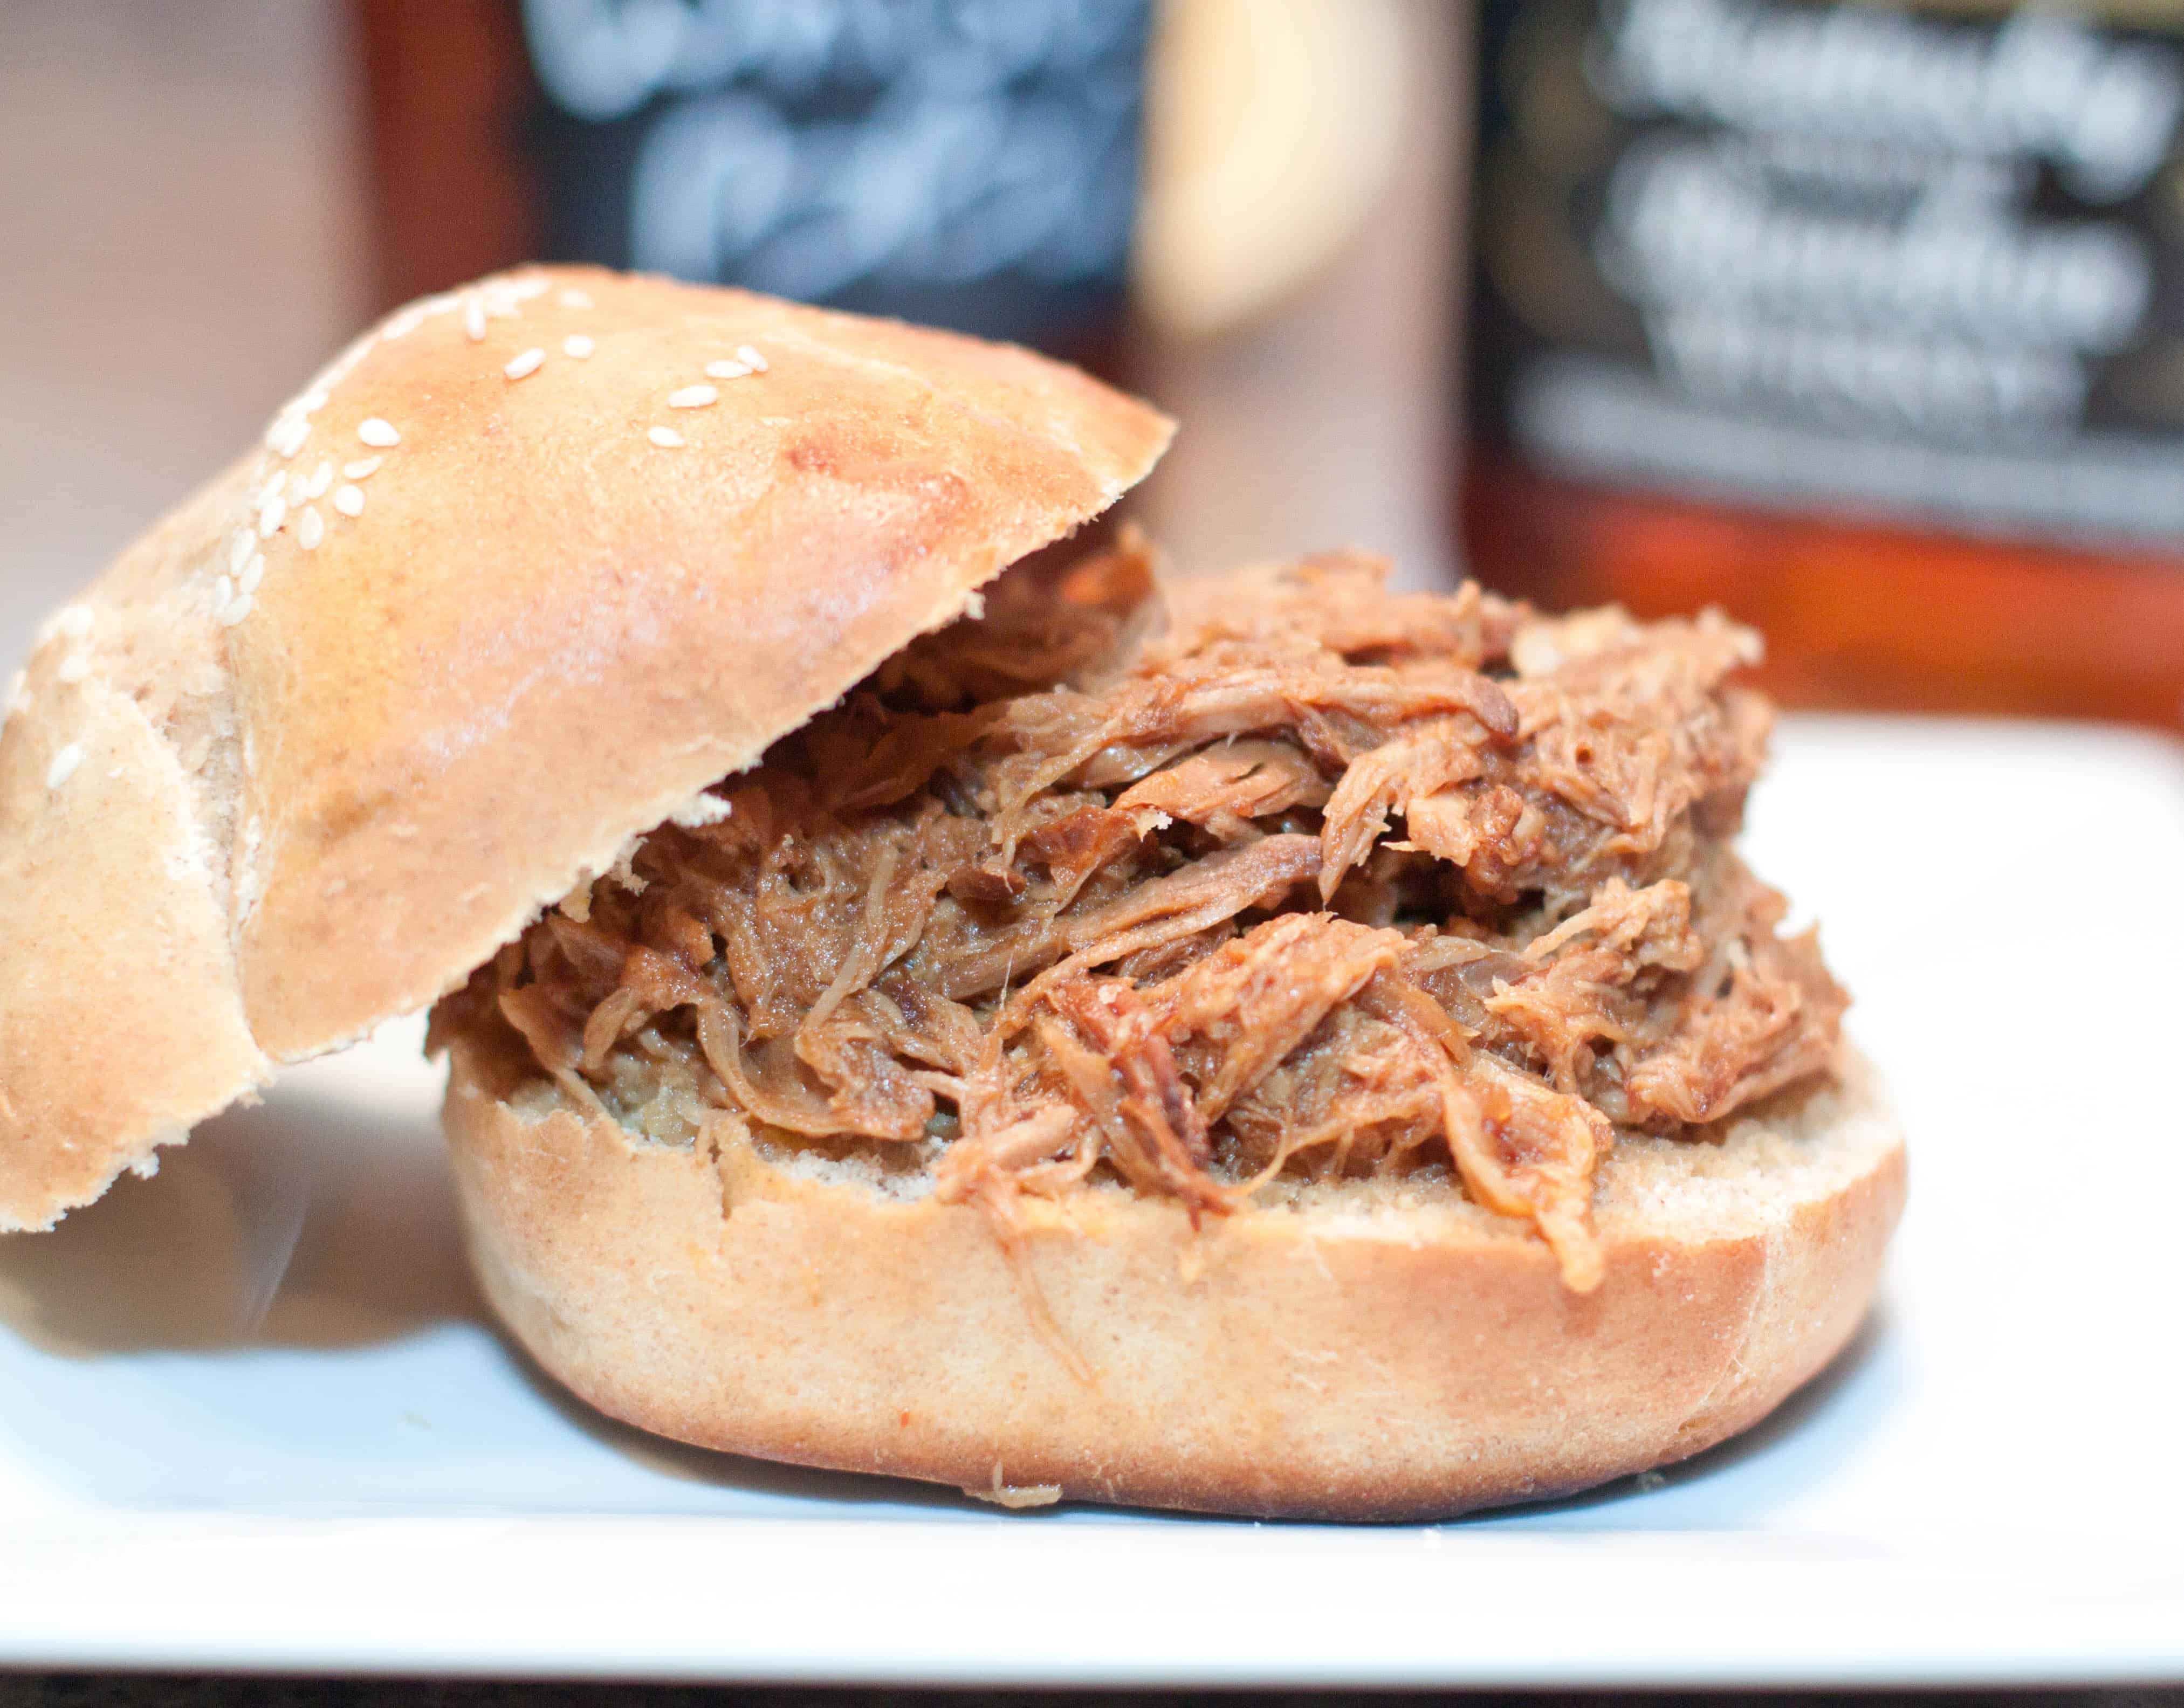 Slow Cooked From Scratch Pulled Pork Sandwiches! Homemade buns and a slow cooked pulled pork with a homemade whiskey BBQ sauce!